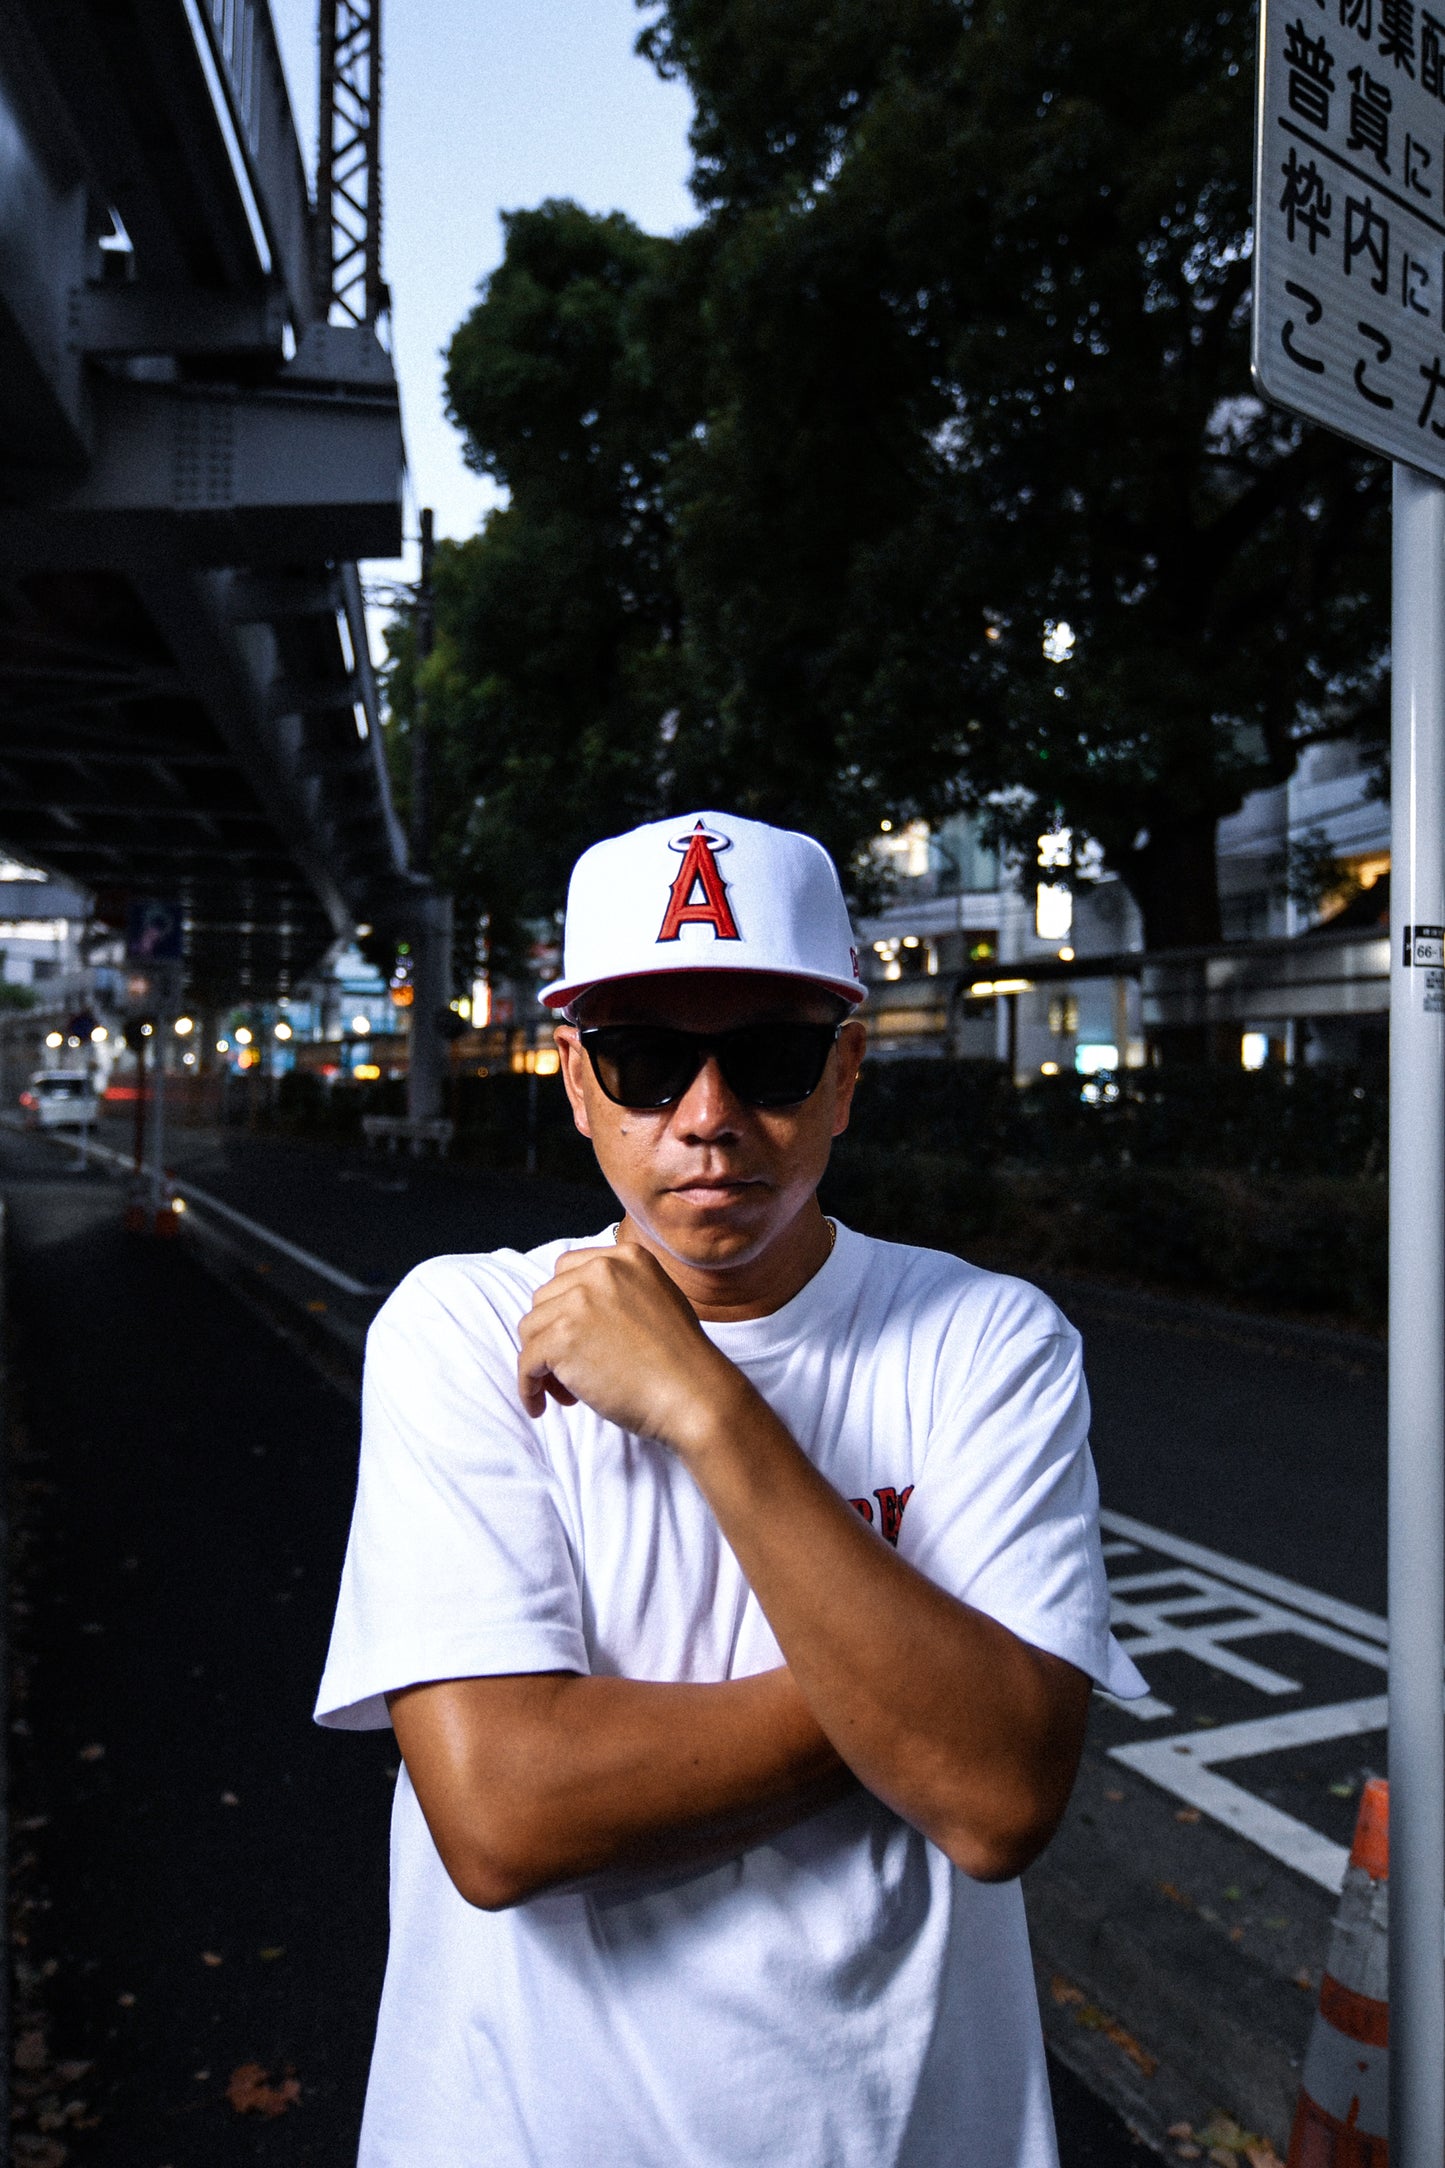 NEW ERA Los Angeles Angels - 59FIFTY JAPAN PATCH WHITE/RED